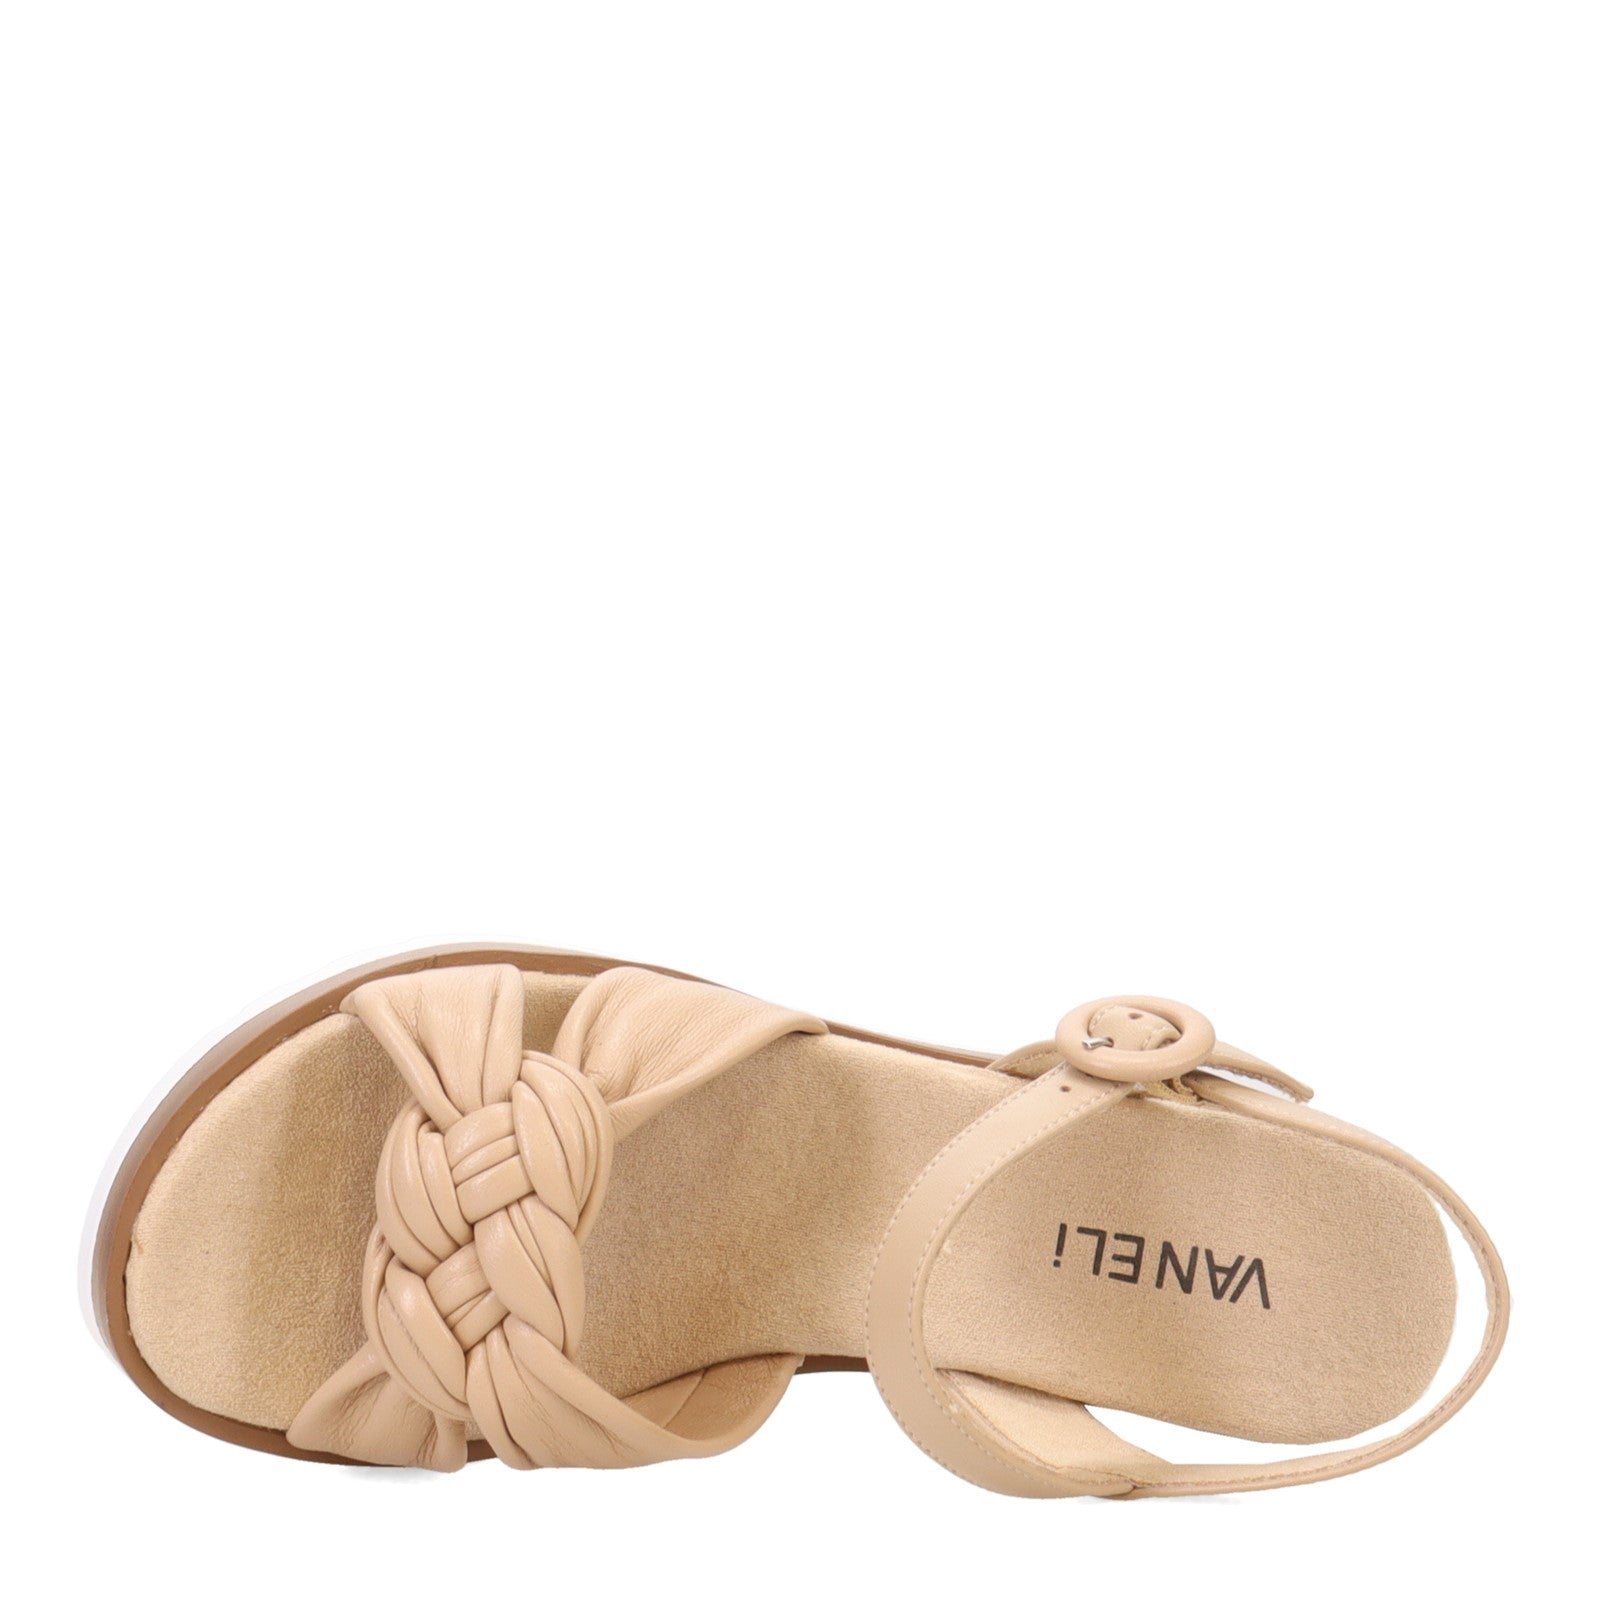 Clew Sandal